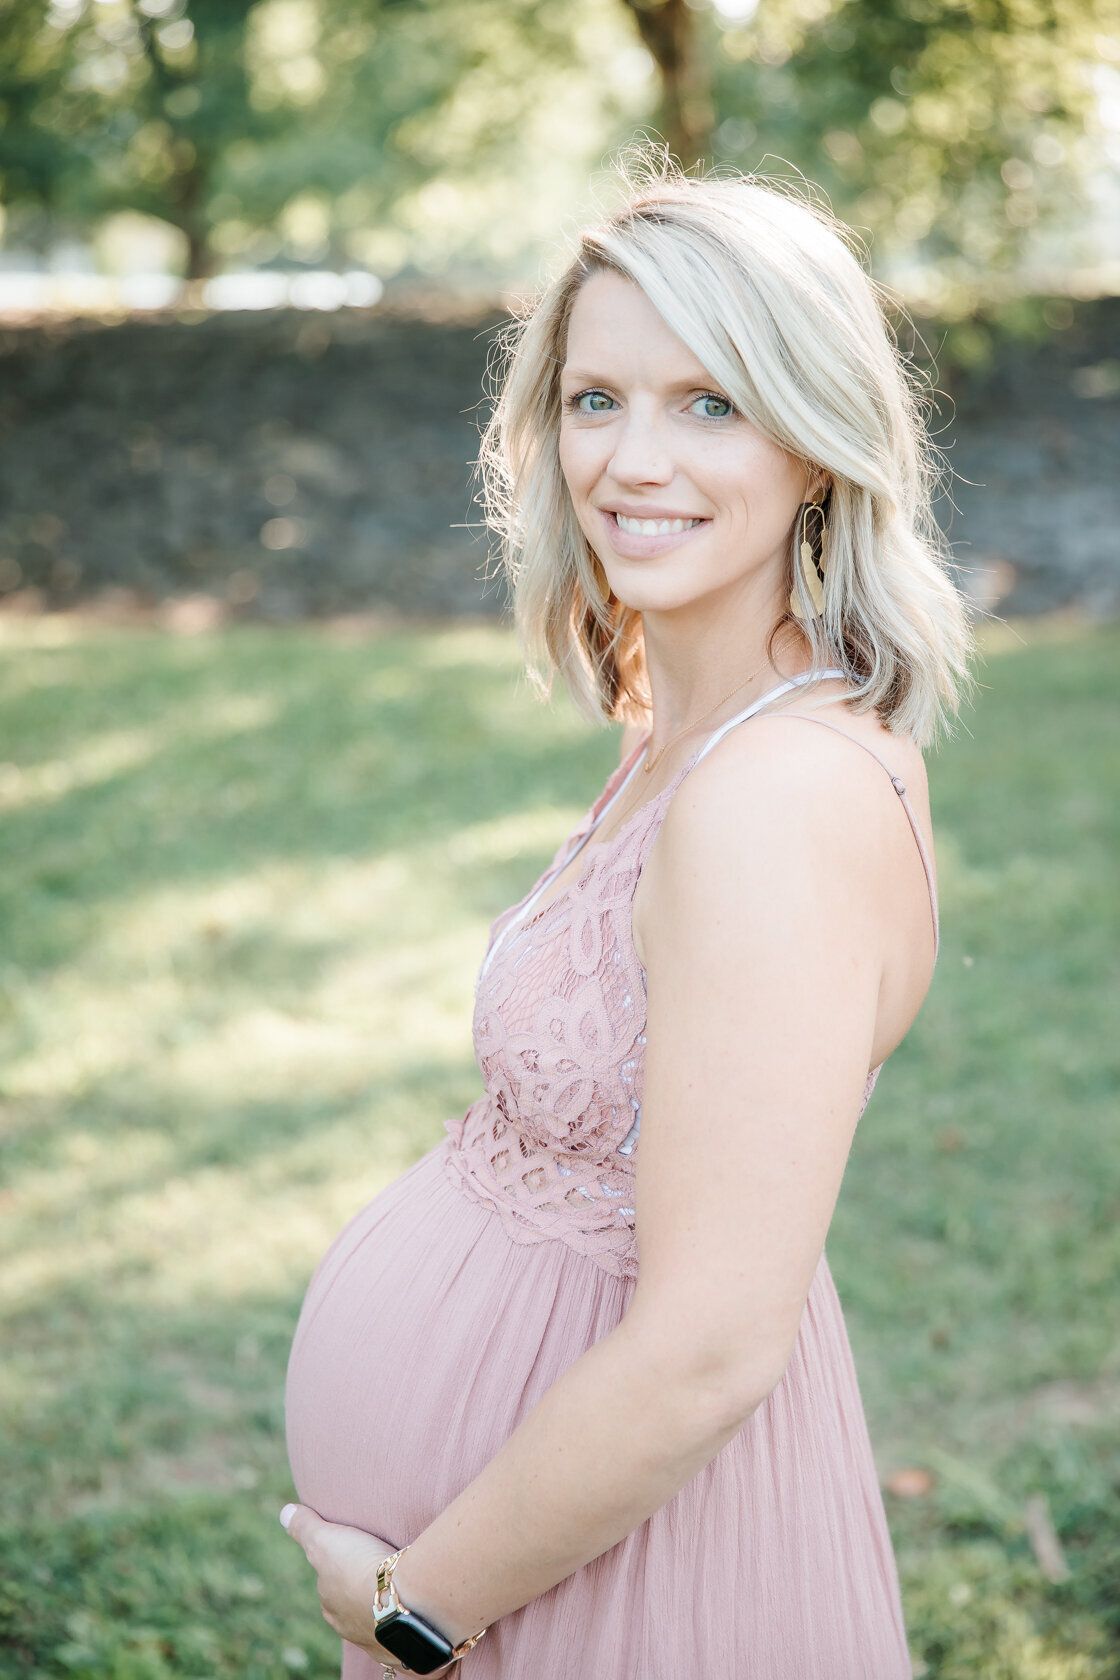 Knoxville-maternity-Photographer-cox-session-Karen-Stone-Photography-31